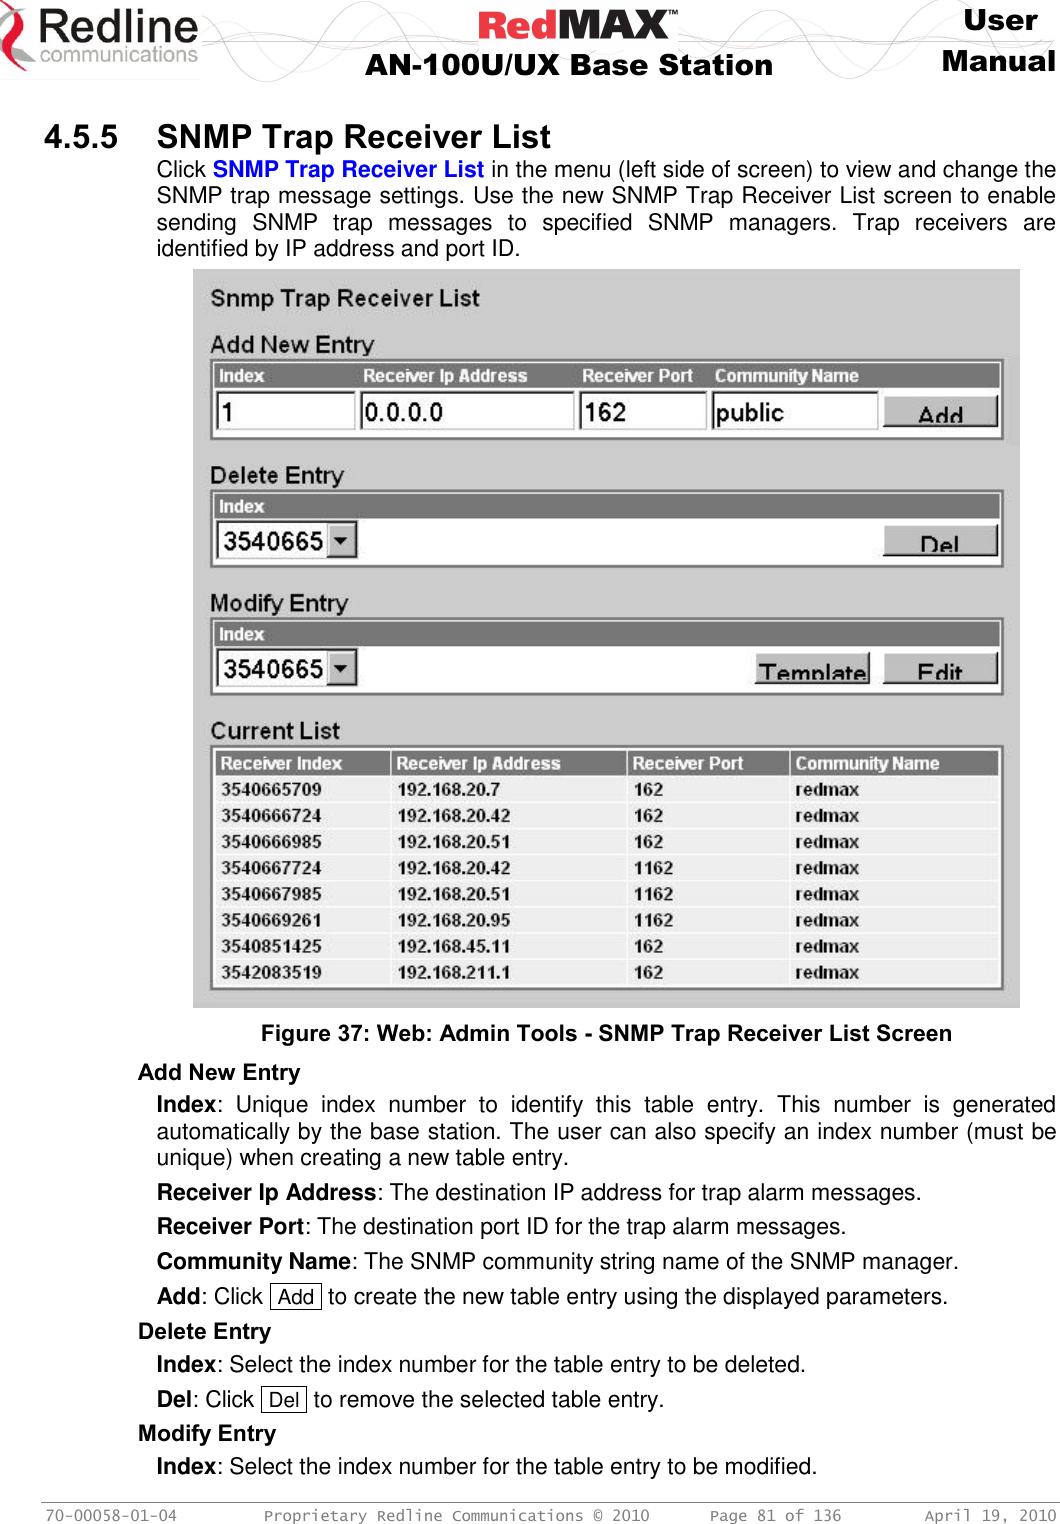     User  AN-100U/UX Base Station Manual   70-00058-01-04  Proprietary Redline Communications © 2010   Page 81 of 136  April 19, 2010  4.5.5 SNMP Trap Receiver List Click SNMP Trap Receiver List in the menu (left side of screen) to view and change the SNMP trap message settings. Use the new SNMP Trap Receiver List screen to enable sending  SNMP  trap  messages  to  specified  SNMP  managers.  Trap  receivers  are identified by IP address and port ID.  Figure 37: Web: Admin Tools - SNMP Trap Receiver List Screen Add New Entry Index:  Unique  index  number  to  identify  this  table  entry.  This  number  is  generated automatically by the base station. The user can also specify an index number (must be unique) when creating a new table entry. Receiver Ip Address: The destination IP address for trap alarm messages. Receiver Port: The destination port ID for the trap alarm messages. Community Name: The SNMP community string name of the SNMP manager. Add: Click  Add  to create the new table entry using the displayed parameters. Delete Entry Index: Select the index number for the table entry to be deleted. Del: Click  Del  to remove the selected table entry. Modify Entry Index: Select the index number for the table entry to be modified. 